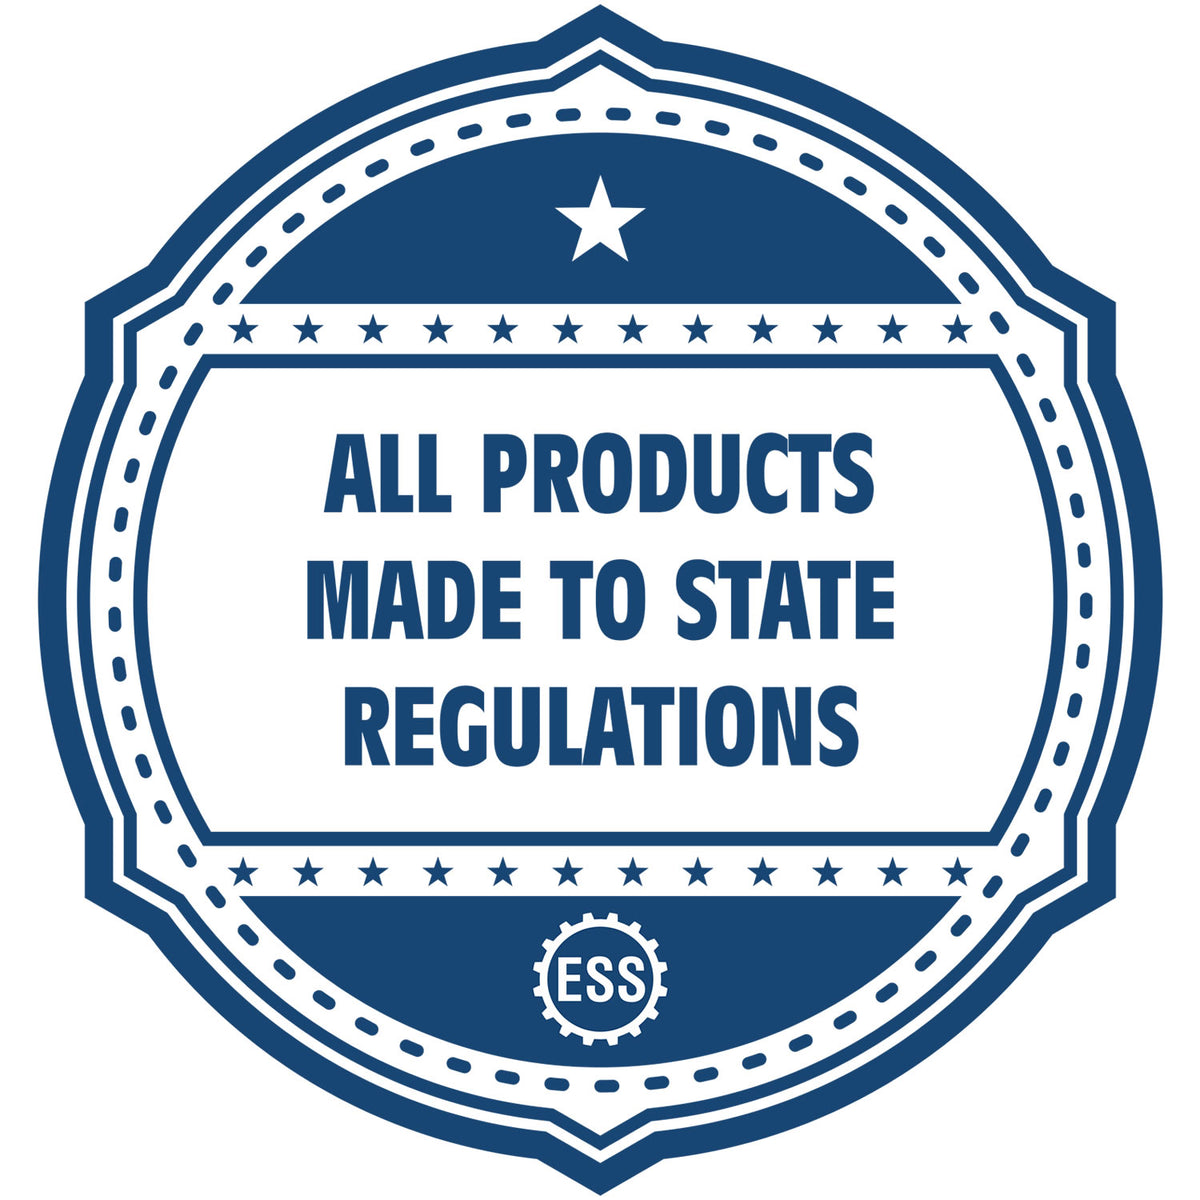 An icon or badge element for the Heavy-Duty Arizona Rectangular Notary Stamp showing that this product is made in compliance with state regulations.